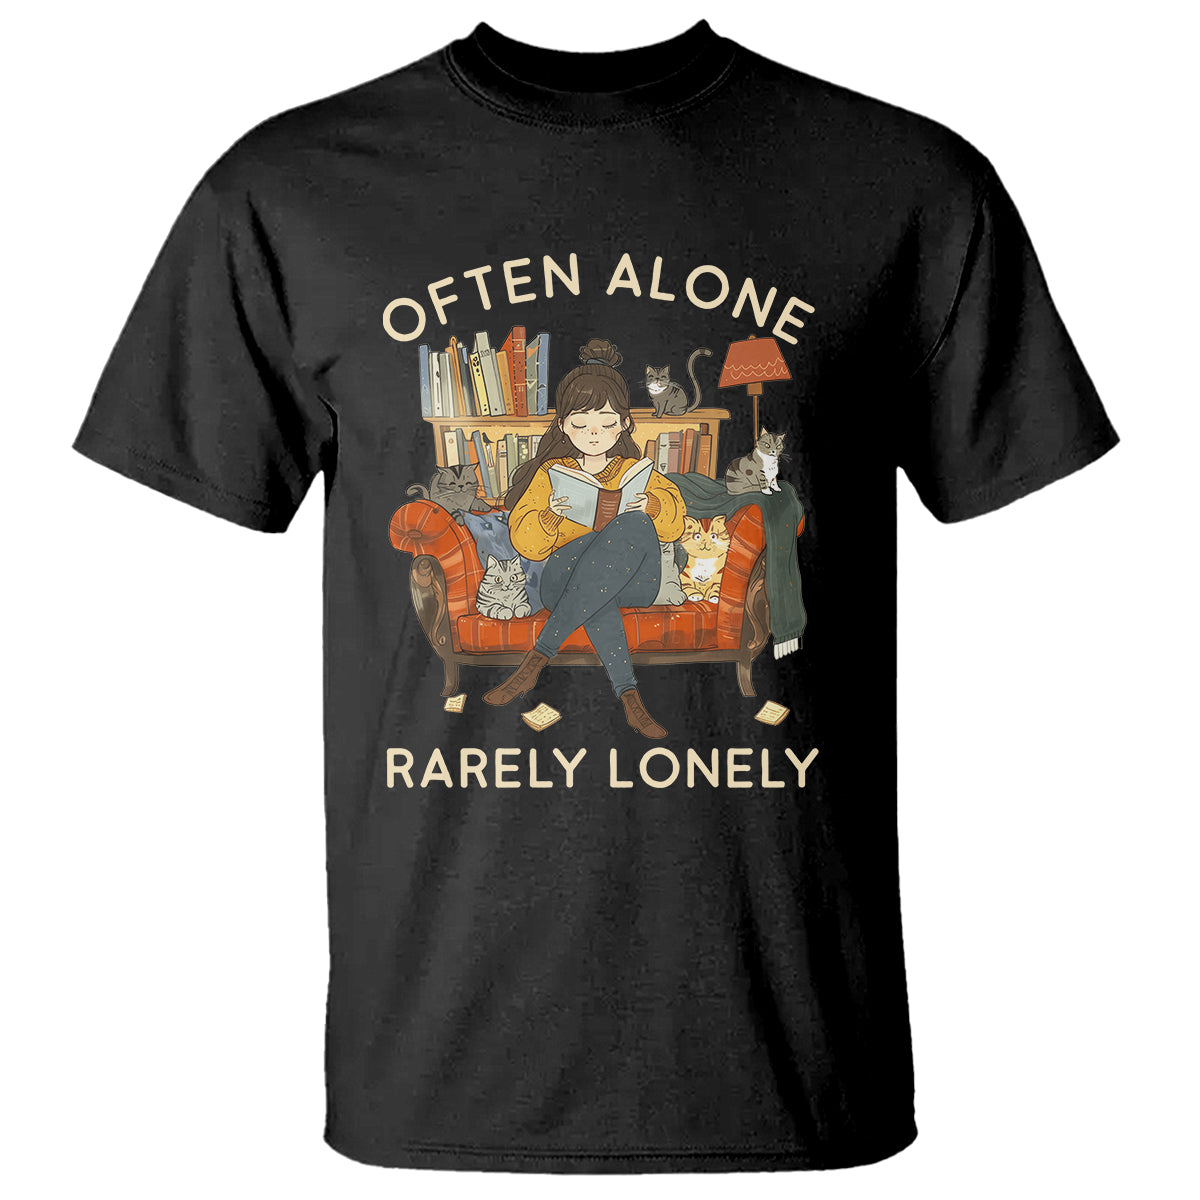 Introvert T Shirt Often Alone Rarely Lonely TS09 Black Printyourwear